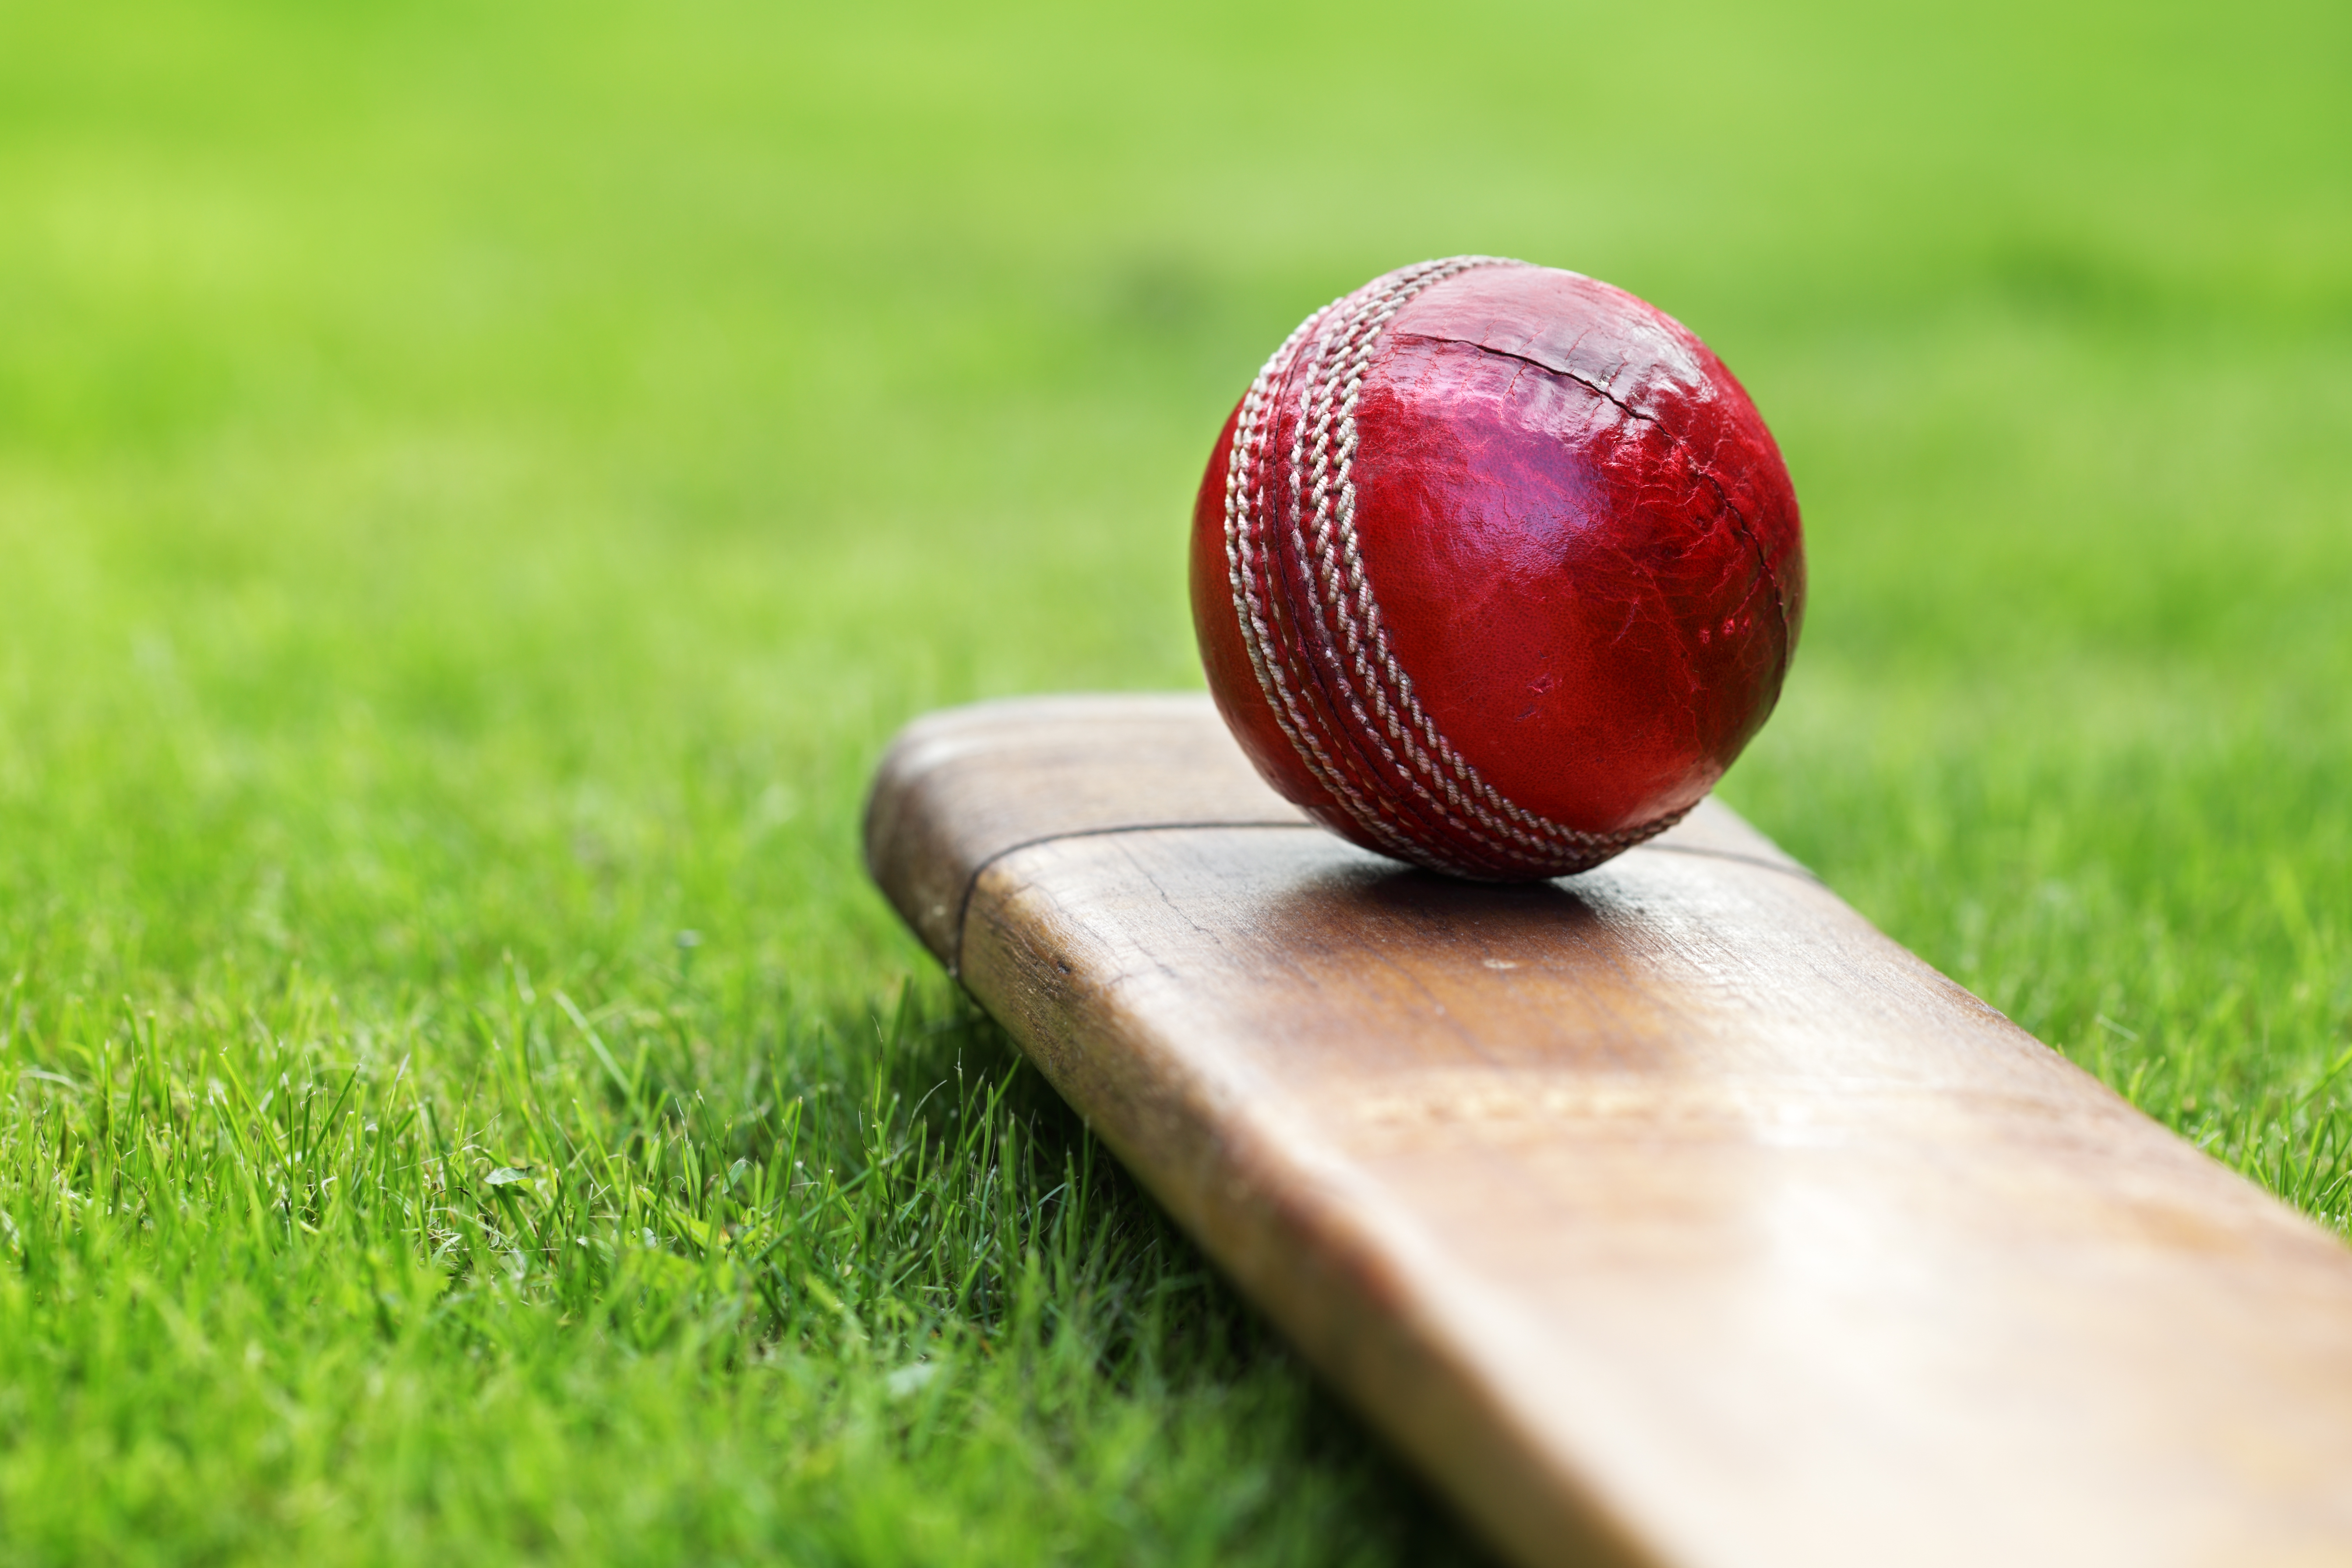 image of a cricket and ball